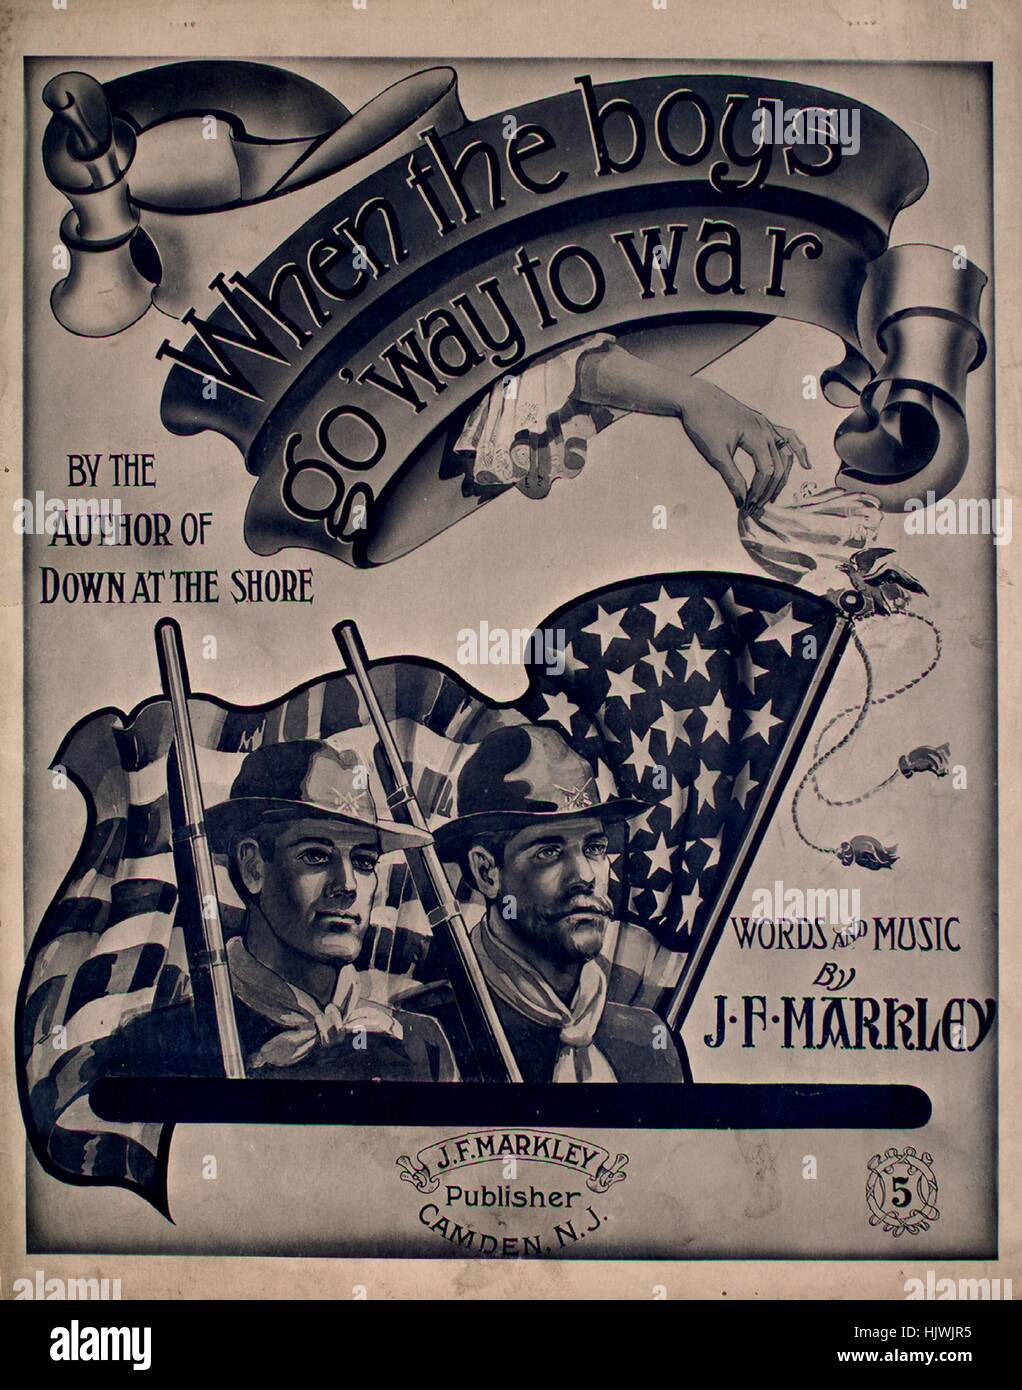 Sheet music cover image of the song 'When the Boys Go 'Way to War', with original authorship notes reading 'Words and Music by JF Markley', 1905. The publisher is listed as 'J.F. Markley, Publisher', the form of composition is 'strophic with chorus', the instrumentation is 'piano and voice', the first line reads 'In the heart of ev'ry son of Uncle Sam, there's a flame of Patriotic zeal', and the illustration artist is listed as 'None'. Stock Photo